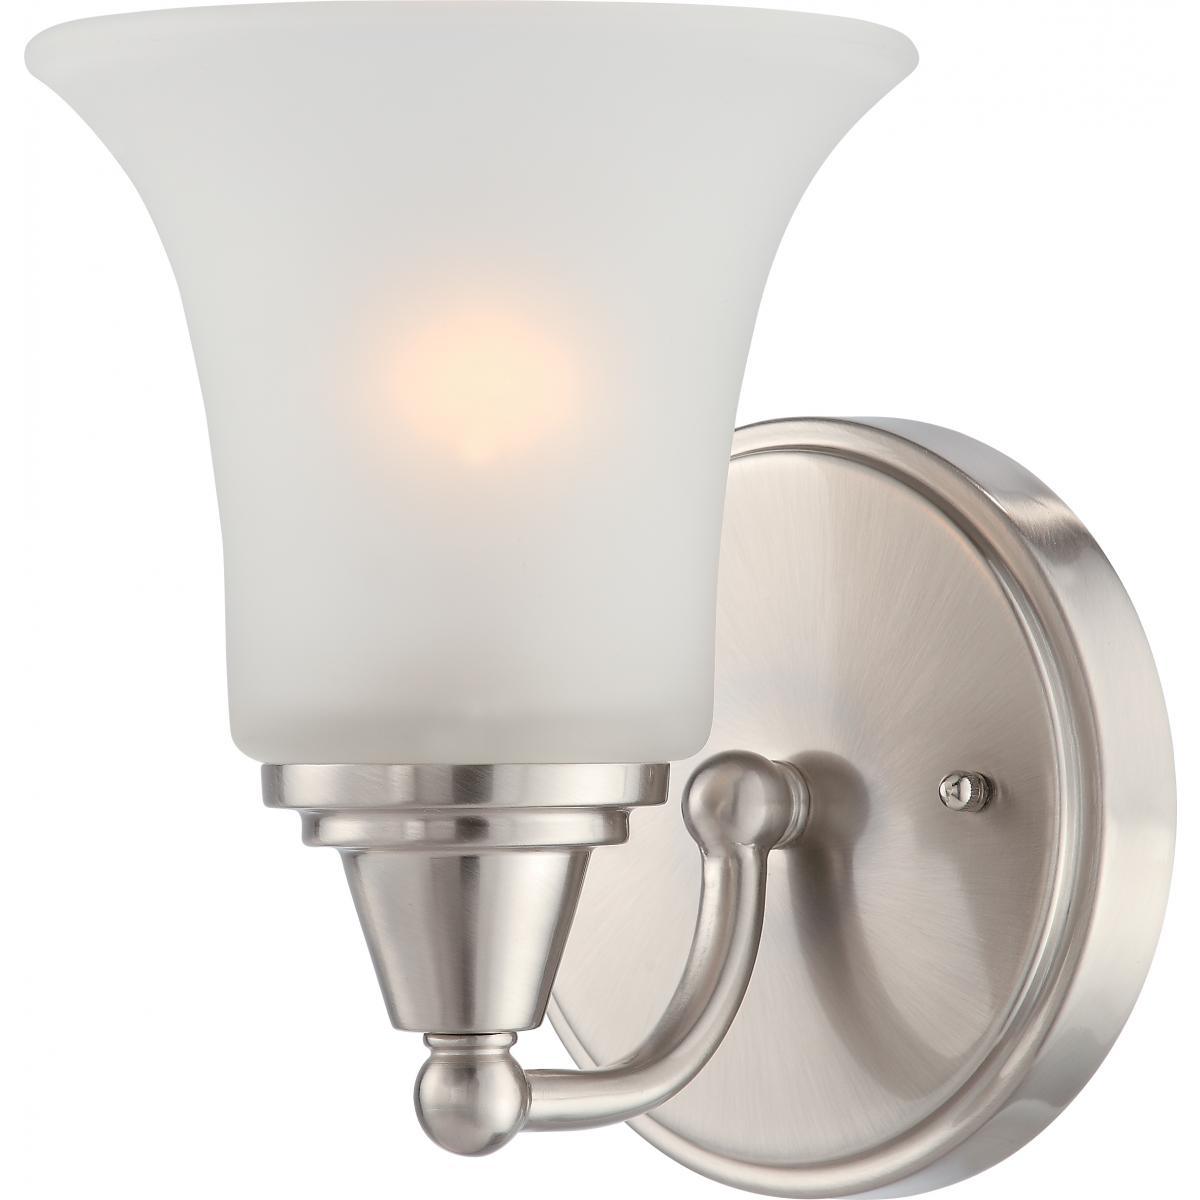 Surrey 8 In. Armed Sconce Nickel Finish